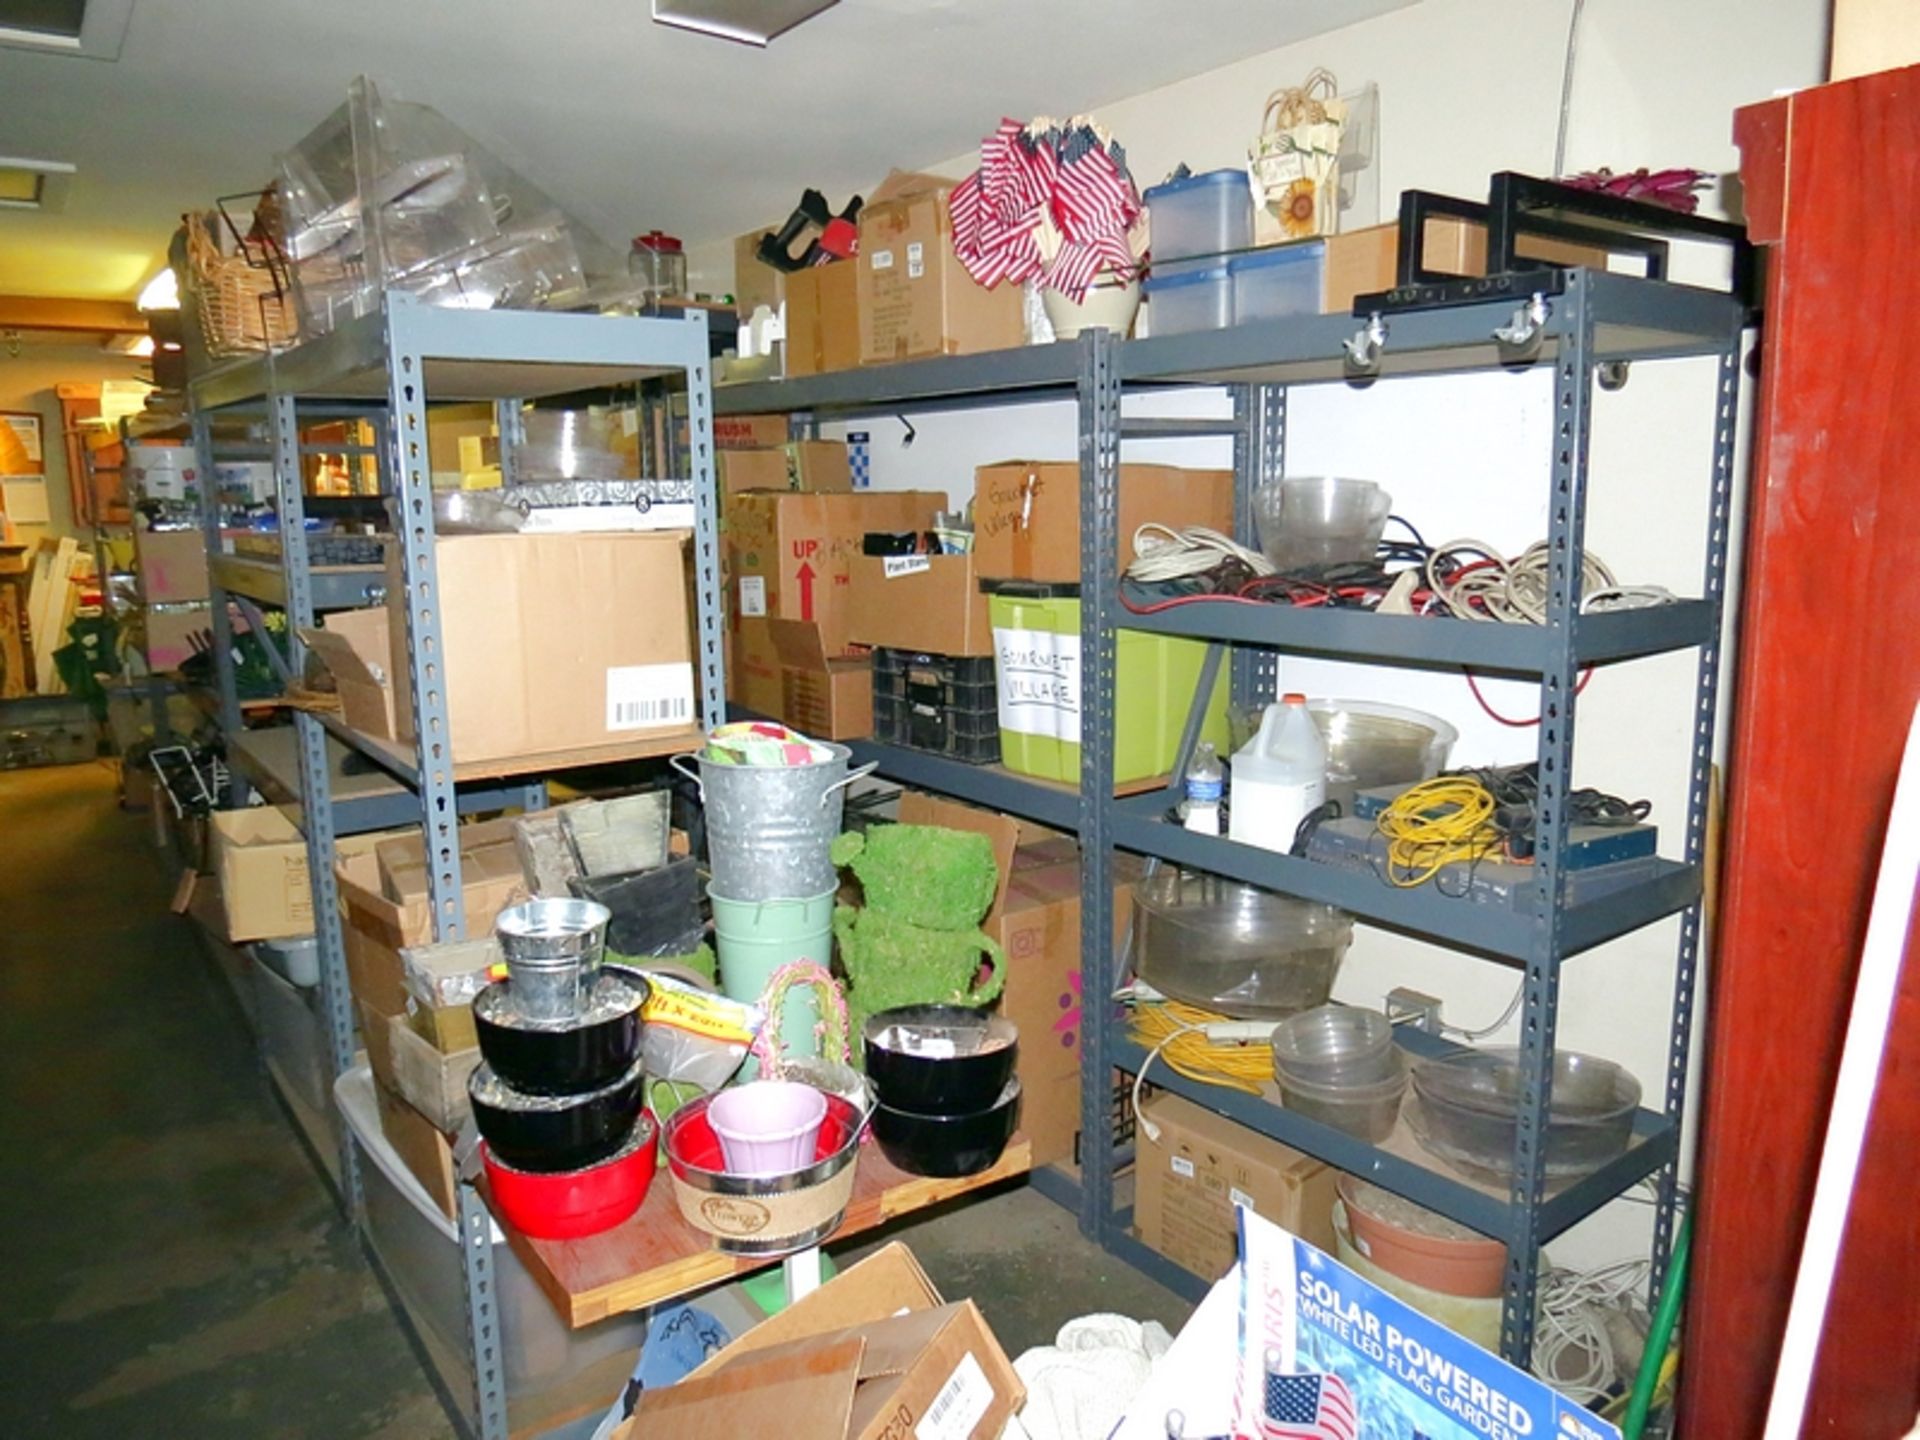 Lot Contents of Retail Storage Room, Pillows, Plates, Assorted Decor, Metal Displays - Image 2 of 6